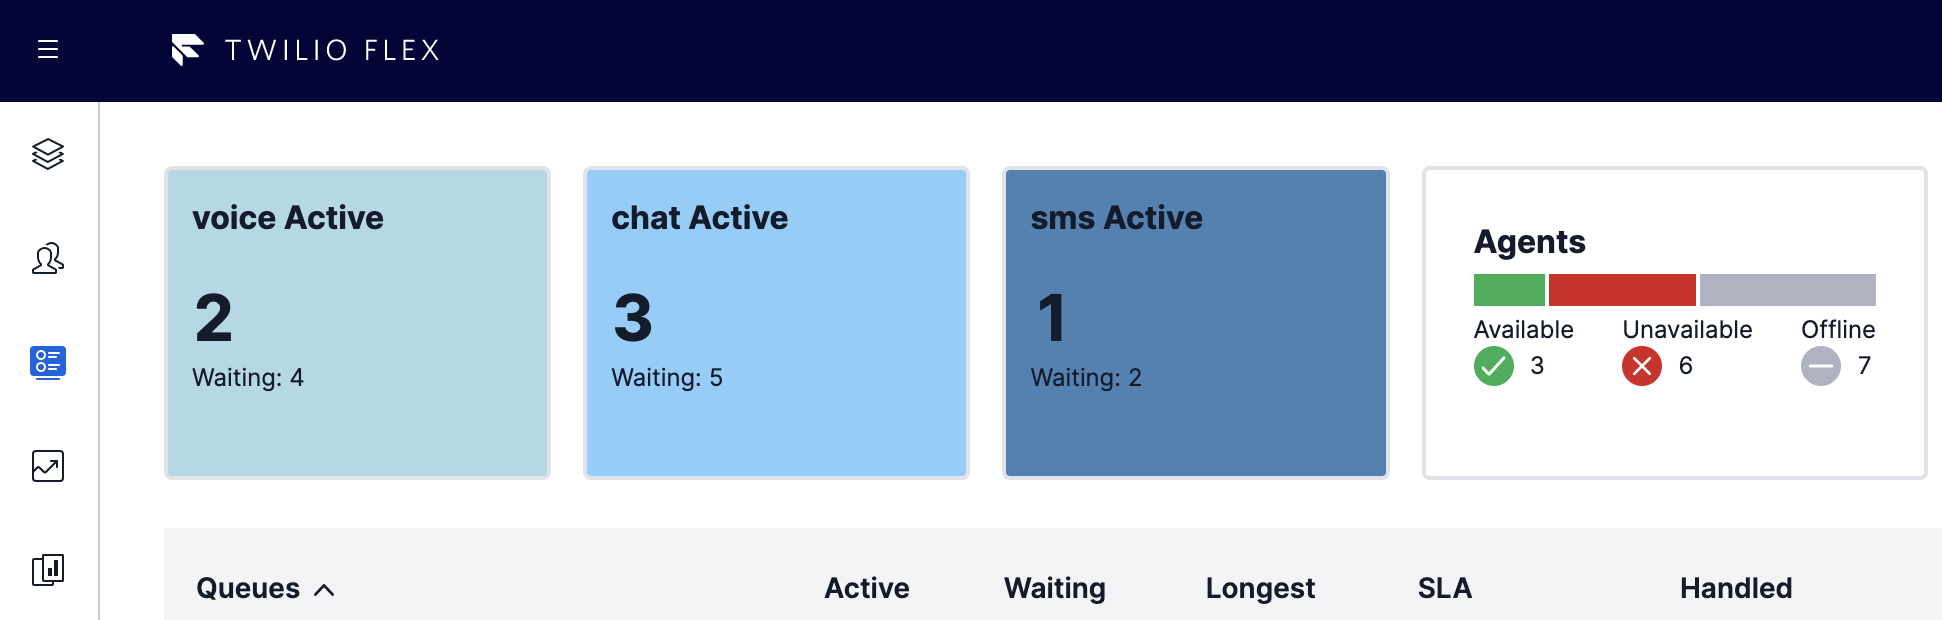 Image of three queues including voice Active, chat Active, sms Active with an bar graph showing number of agents available, unavailable, and offline. The three tiles are all in different colors for visual differentiation all in different colors for visual differentiation.